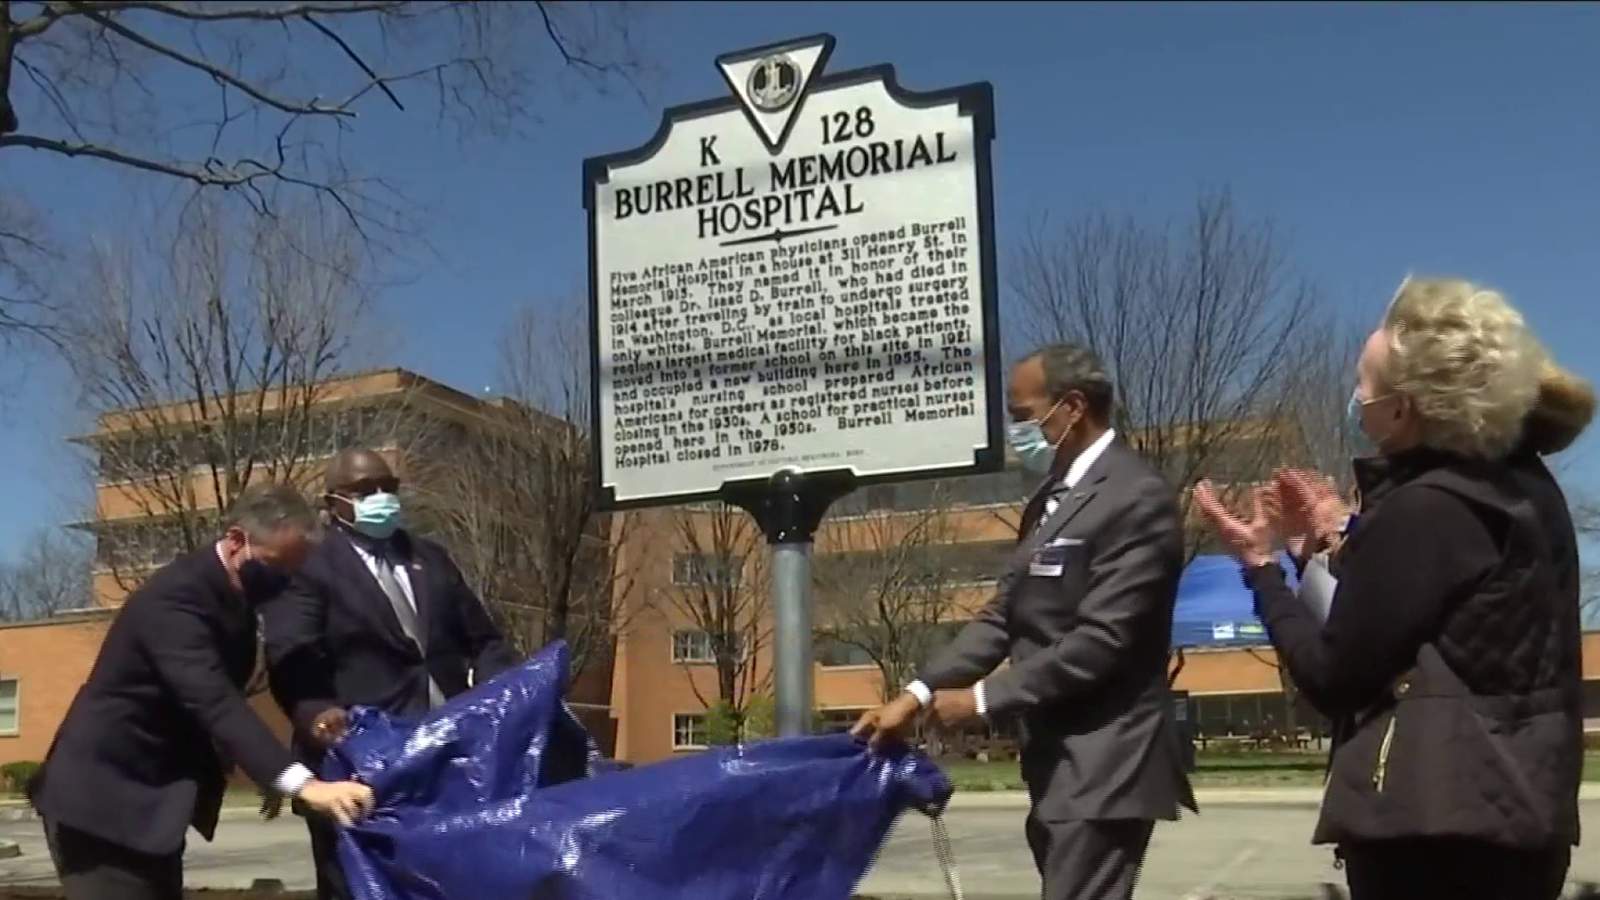 Burrell Memorial Hospital site honored with historical marker